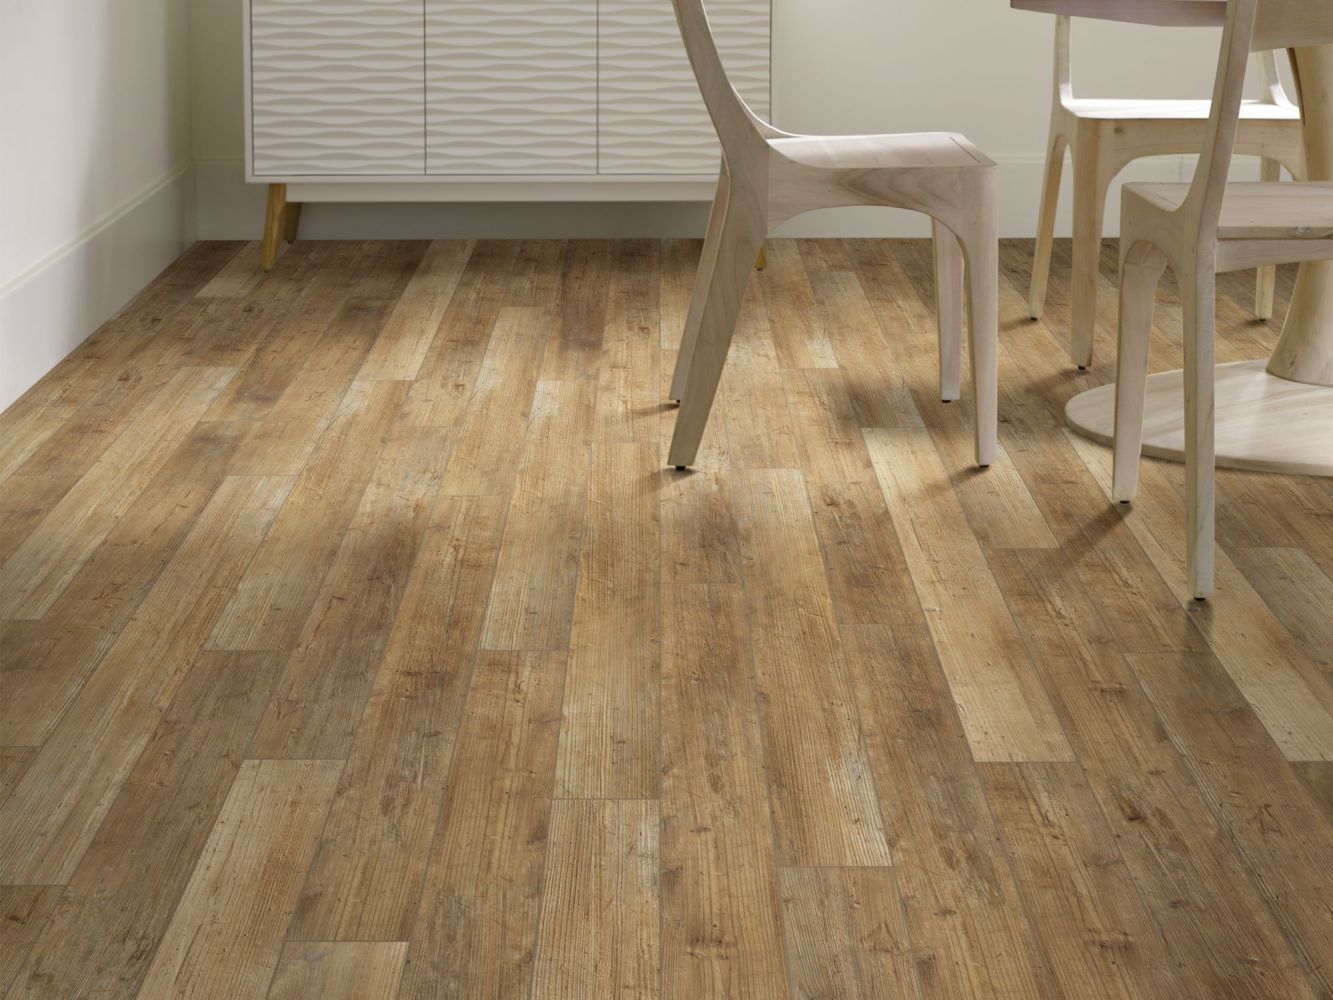 Shaw Floors Resilient Residential Paragon 5″ Plus Touch Pine 00690_1019V